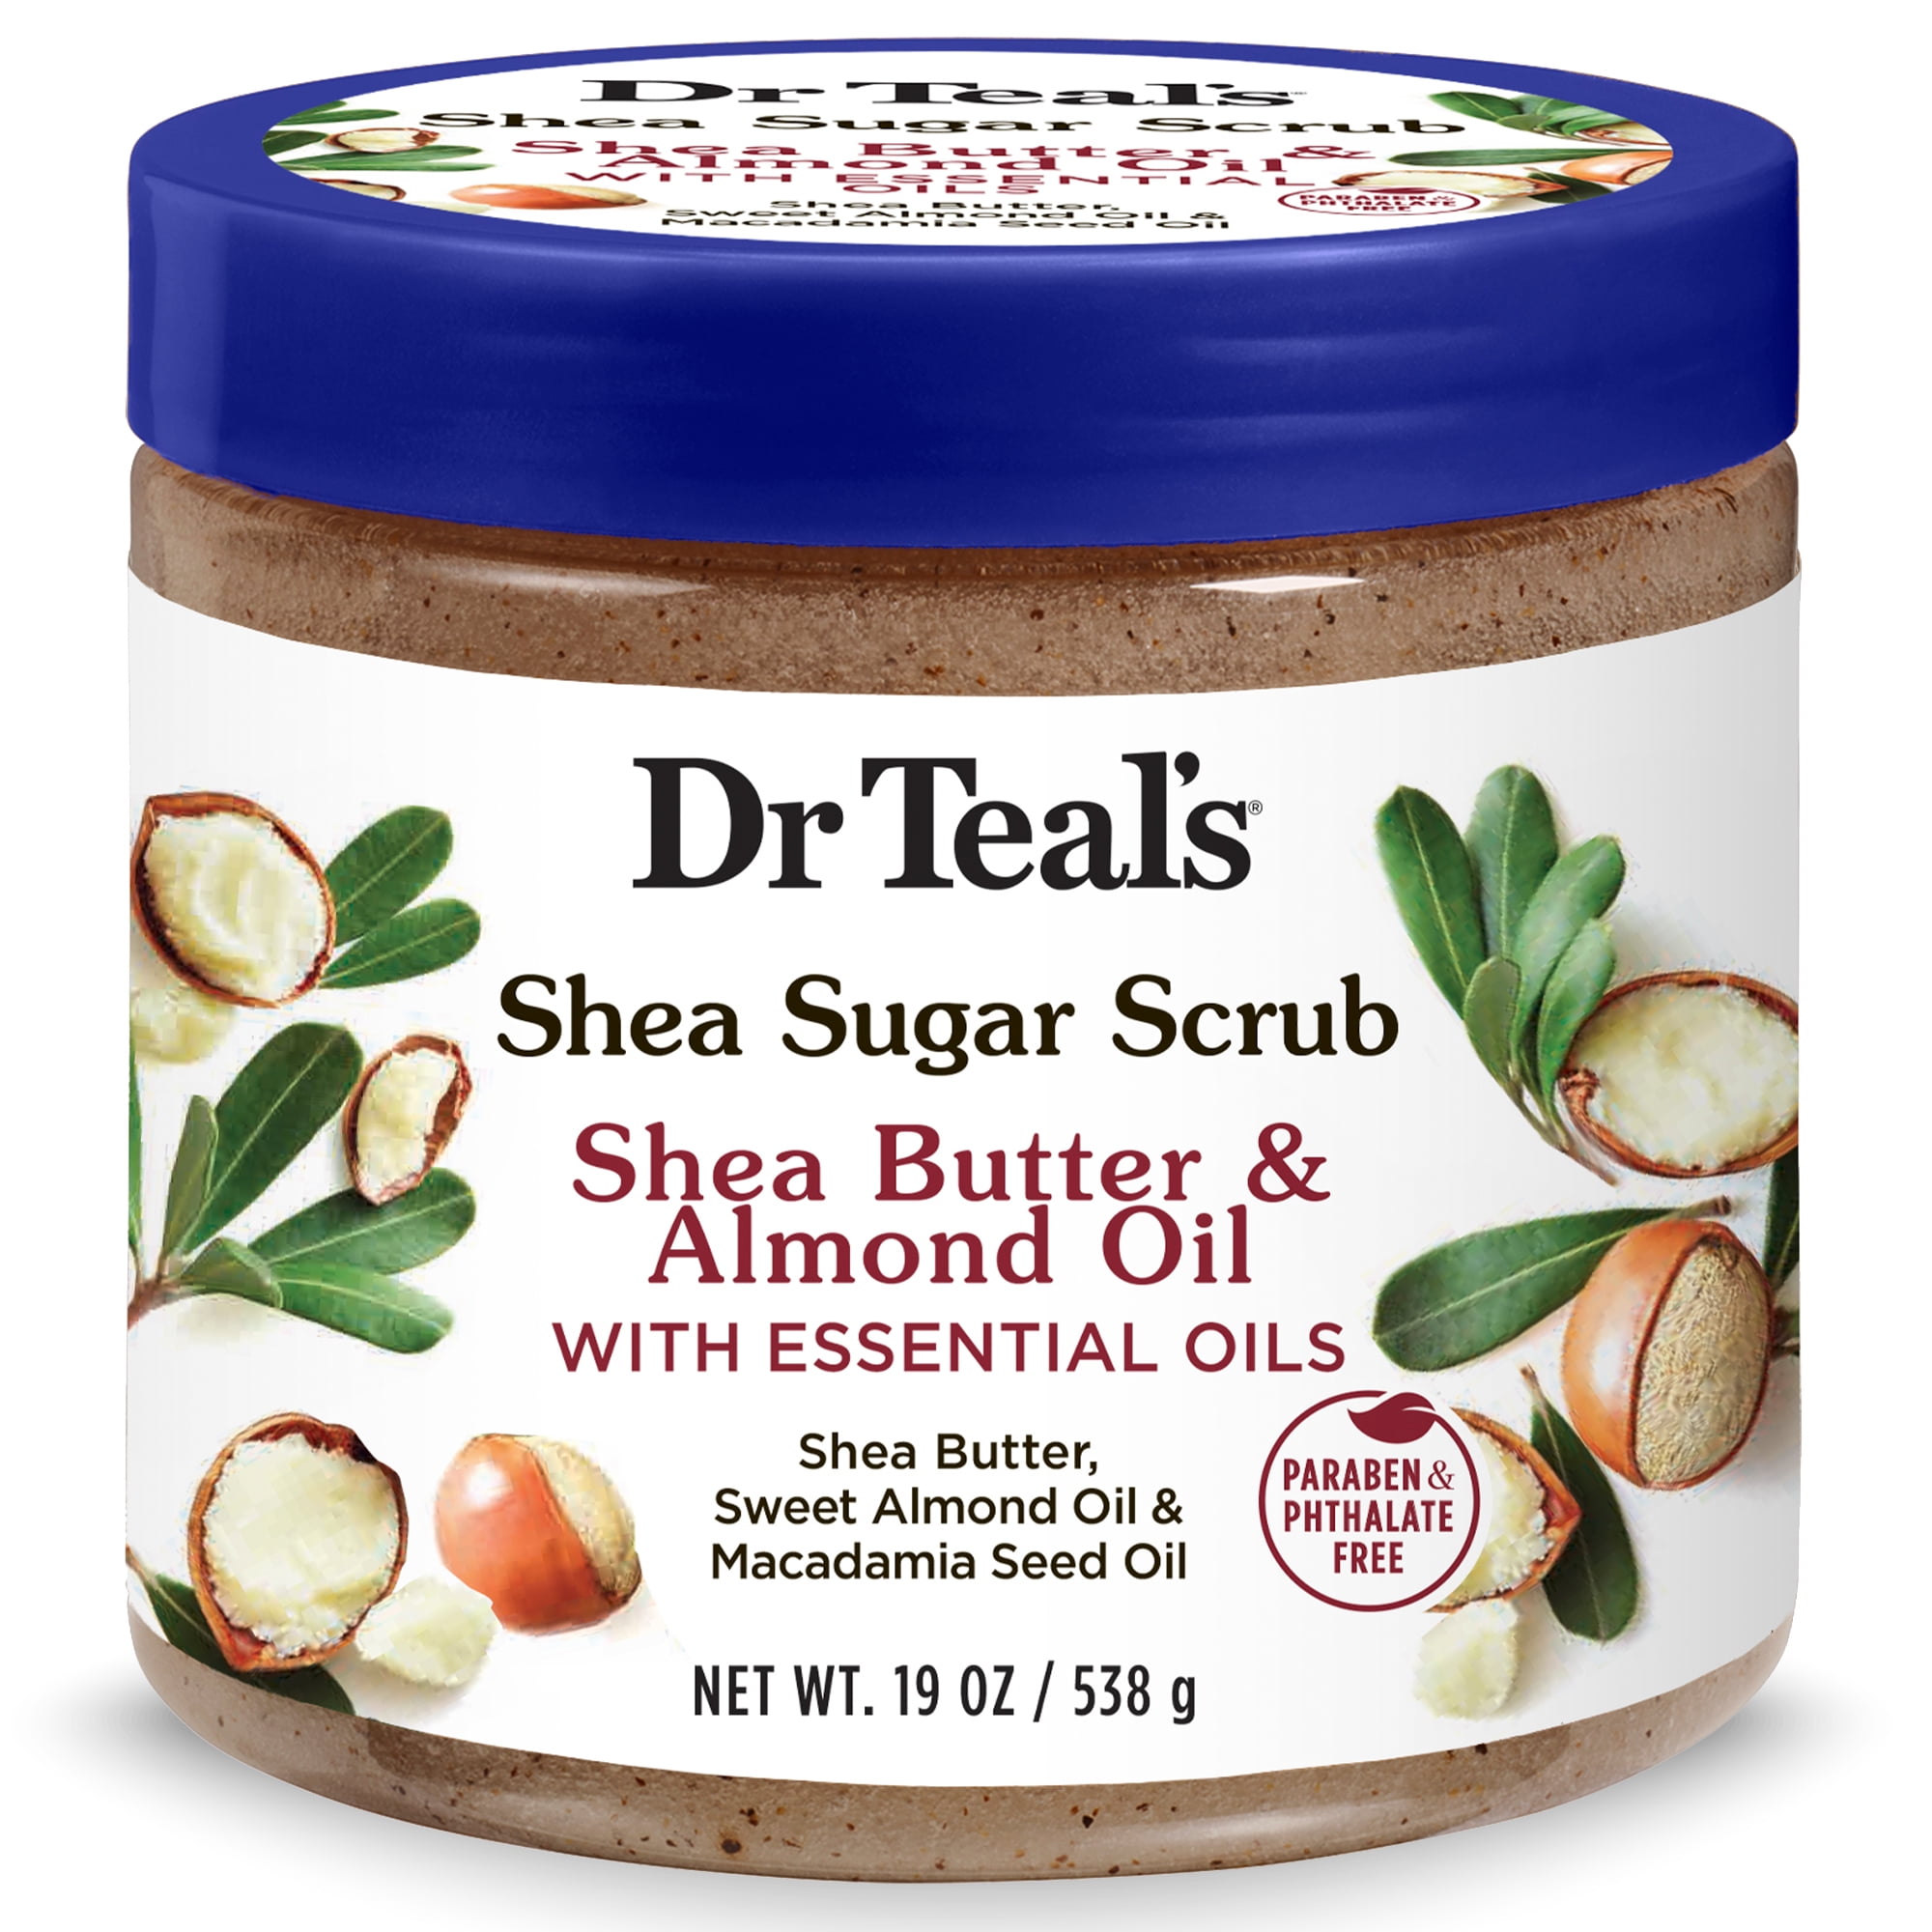 Dr Teals Shea Sugar Body Scrub, Shea Butter with Almond Oil and Essential Oils, 19 oz